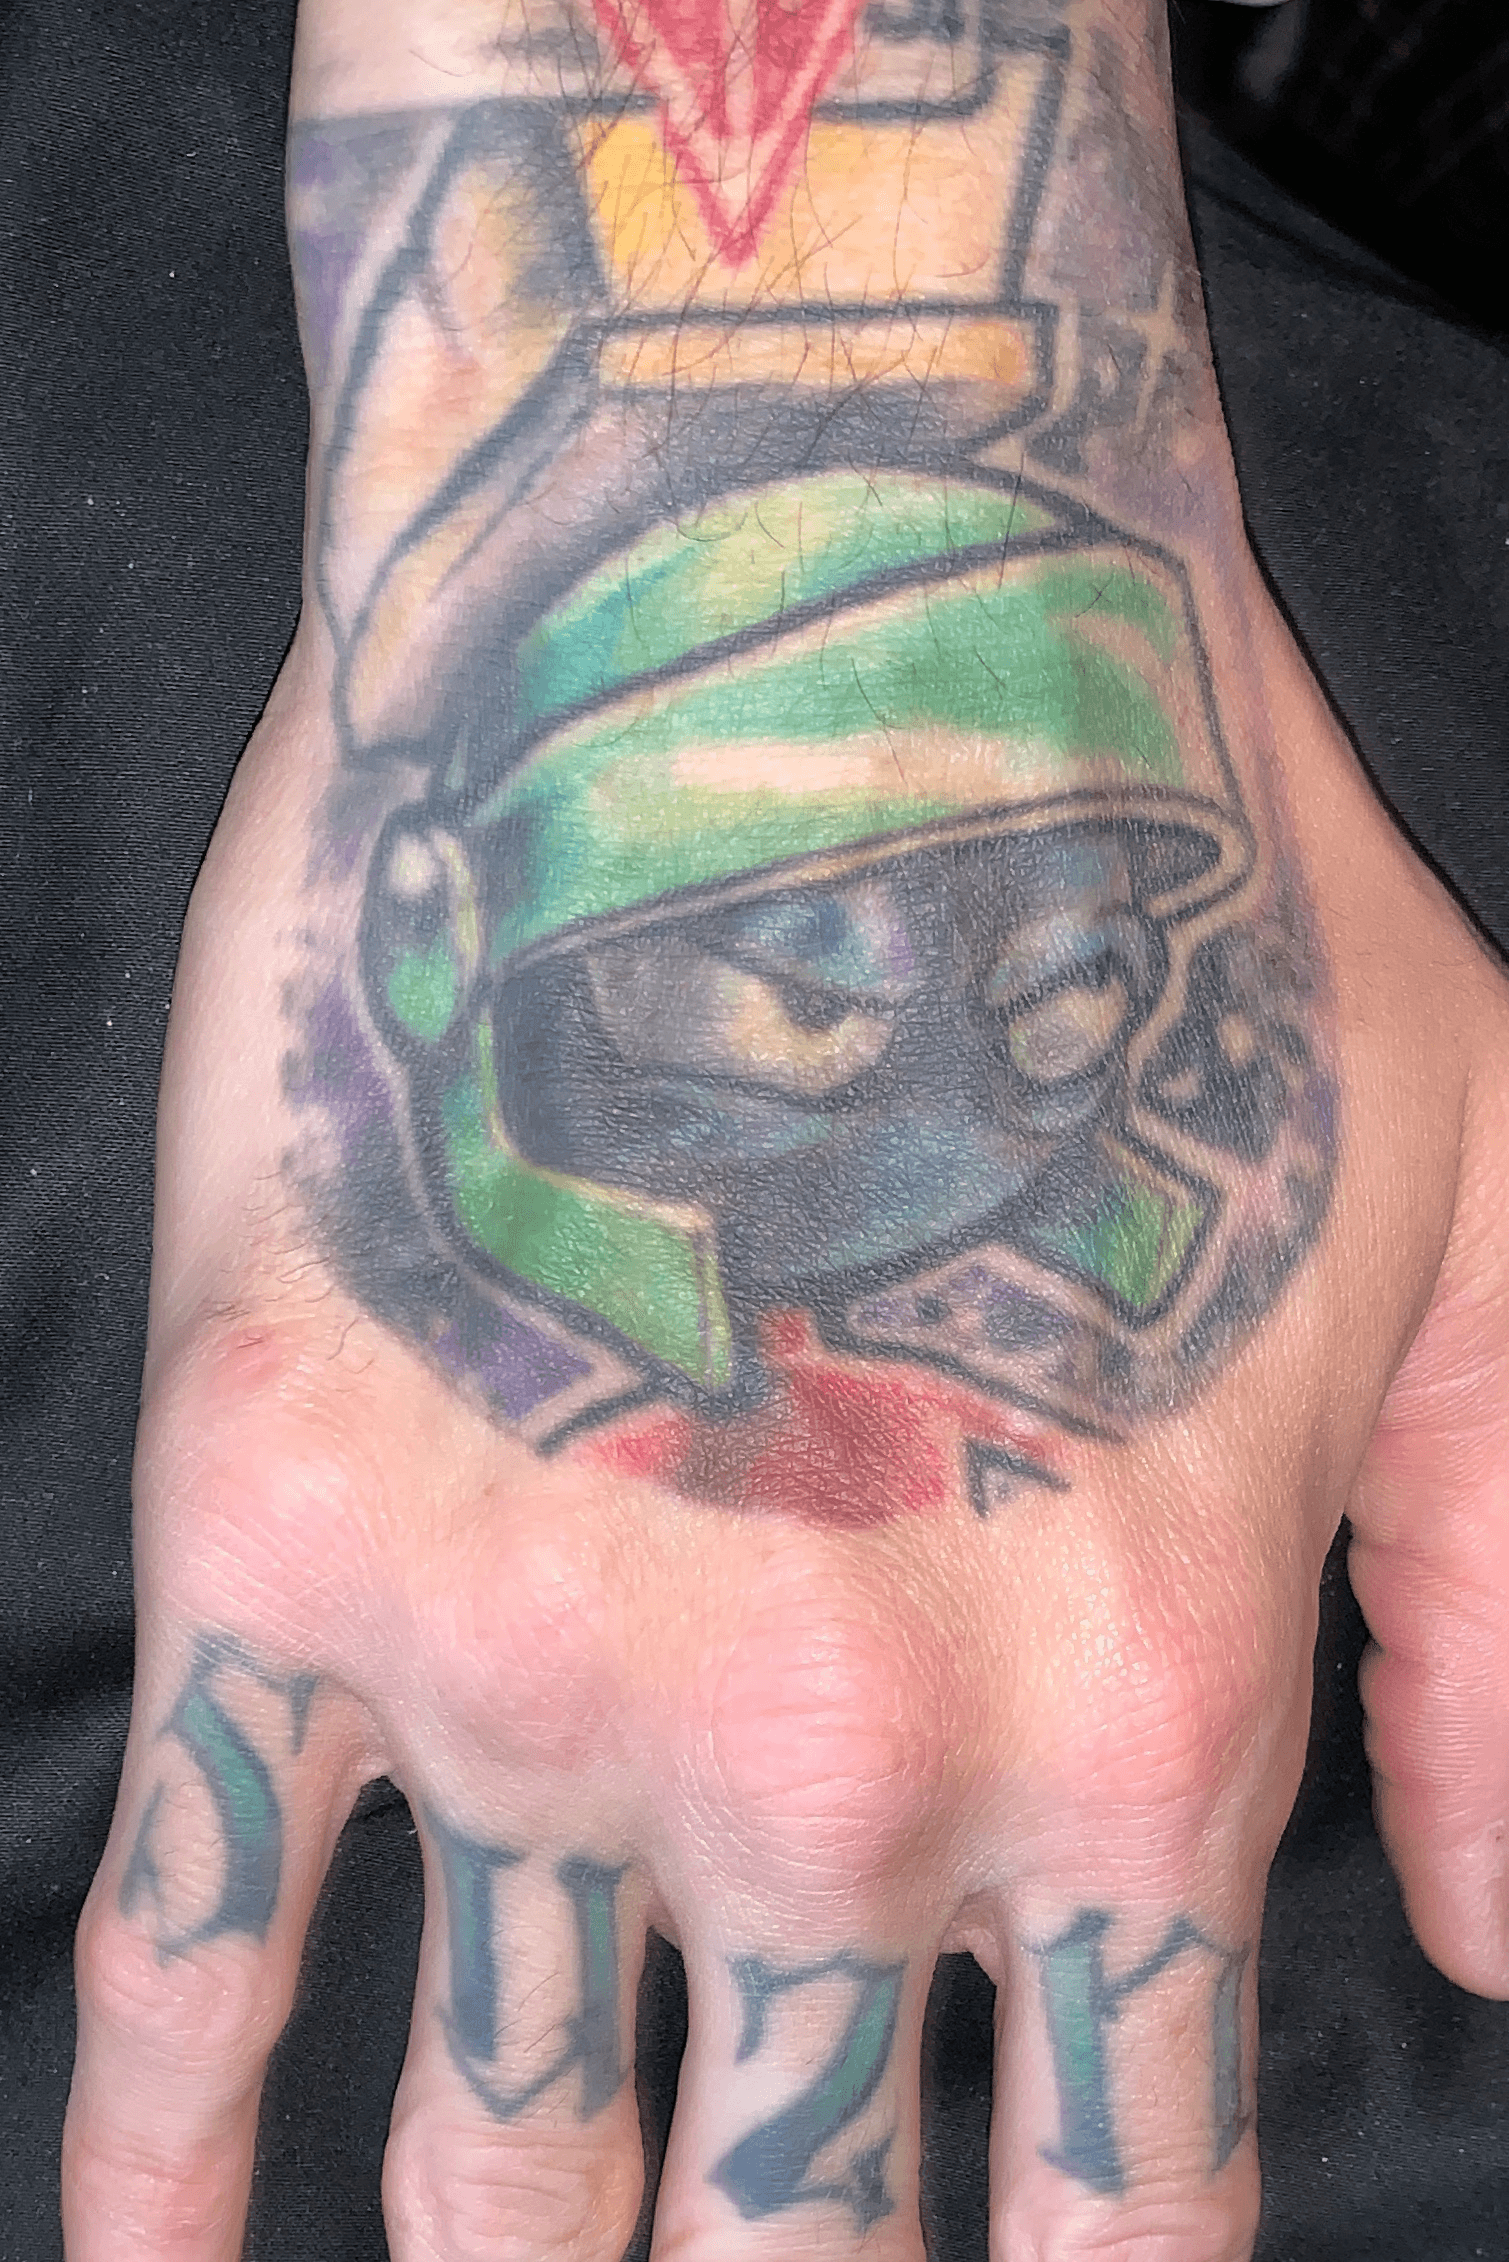 Marvin The Martian by Carlos TattooNOW